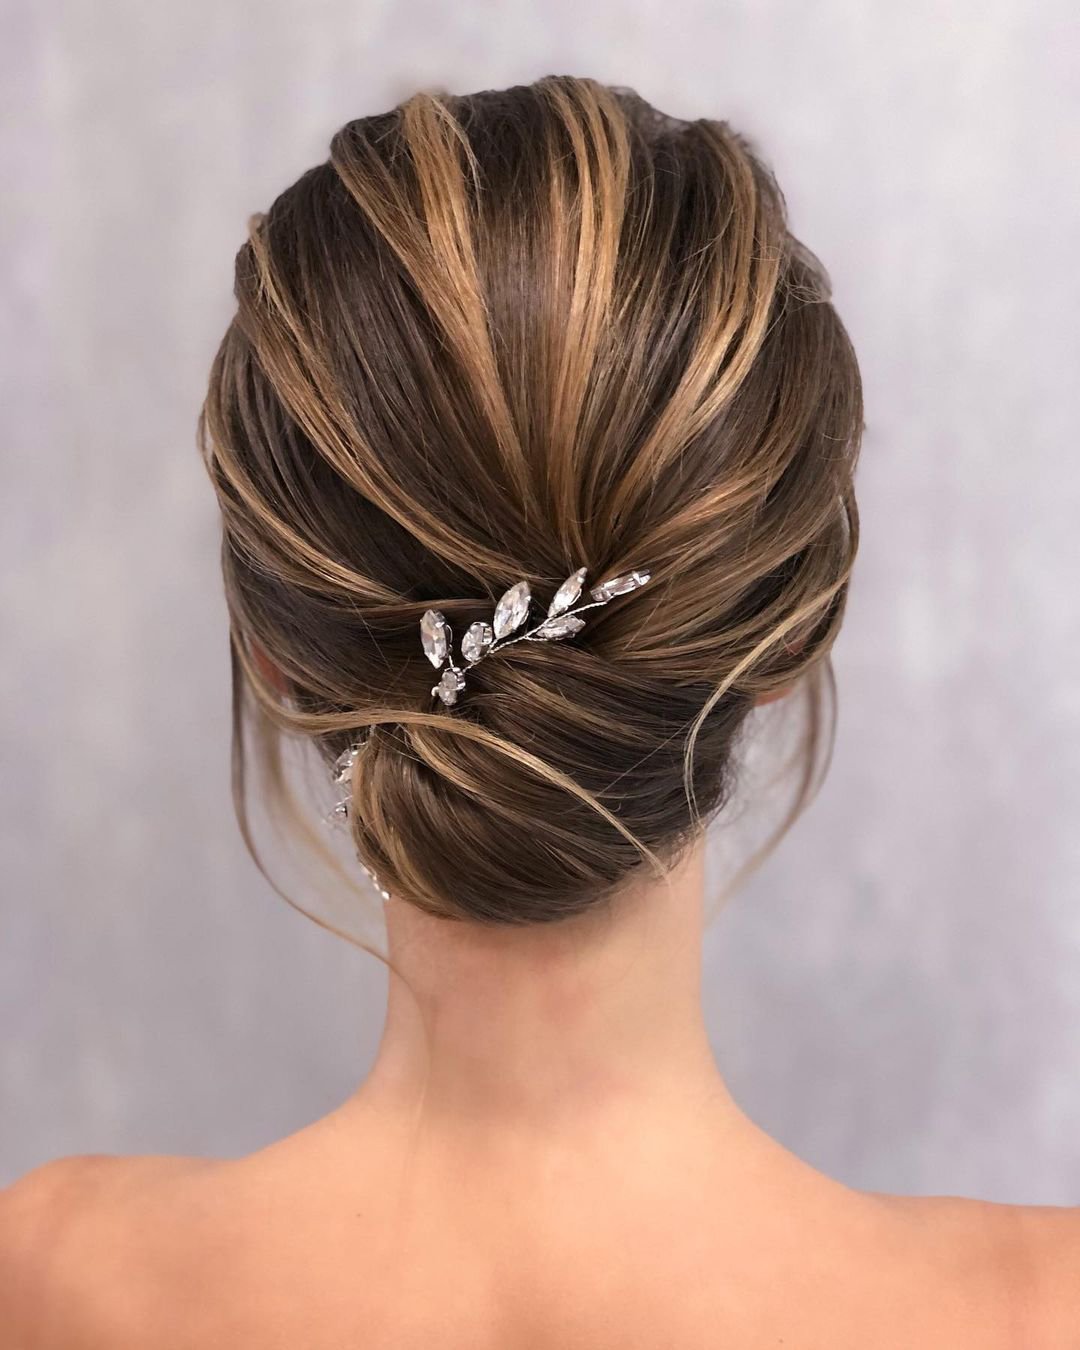 42 Updo Hairstyles for Any Hair Type  Wedding Theme  Zola Expert Wedding  Advice